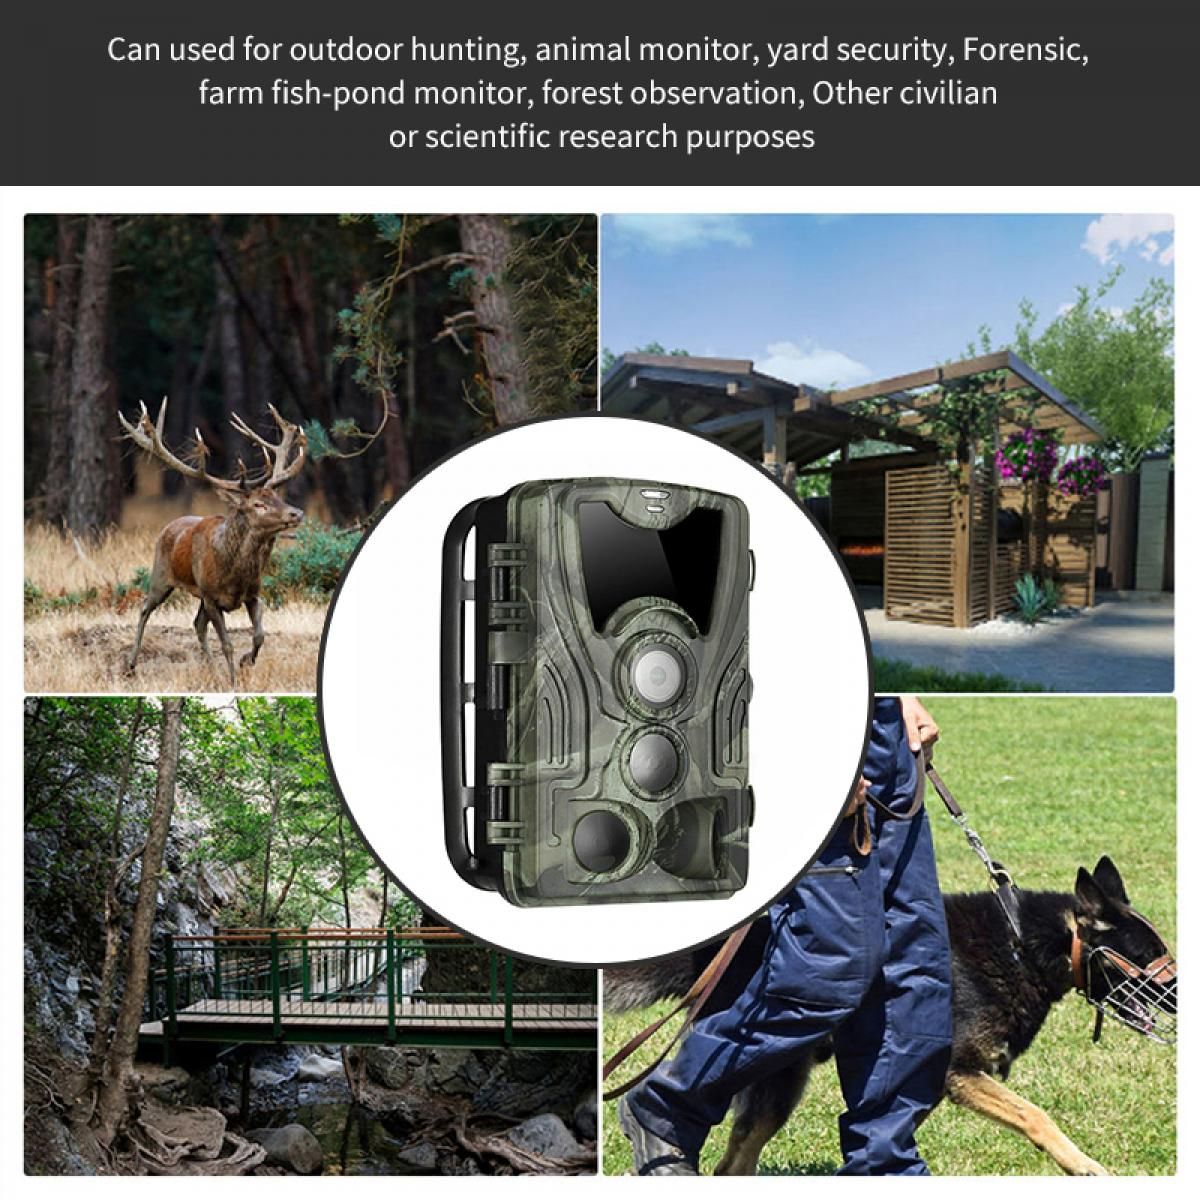 K&F Trail Game Camera 4K WiFi 30MP with 940nm Infrared Outdoor IP65 Waterproof Hunting Infrared Night Vision Camera (KF35.019)